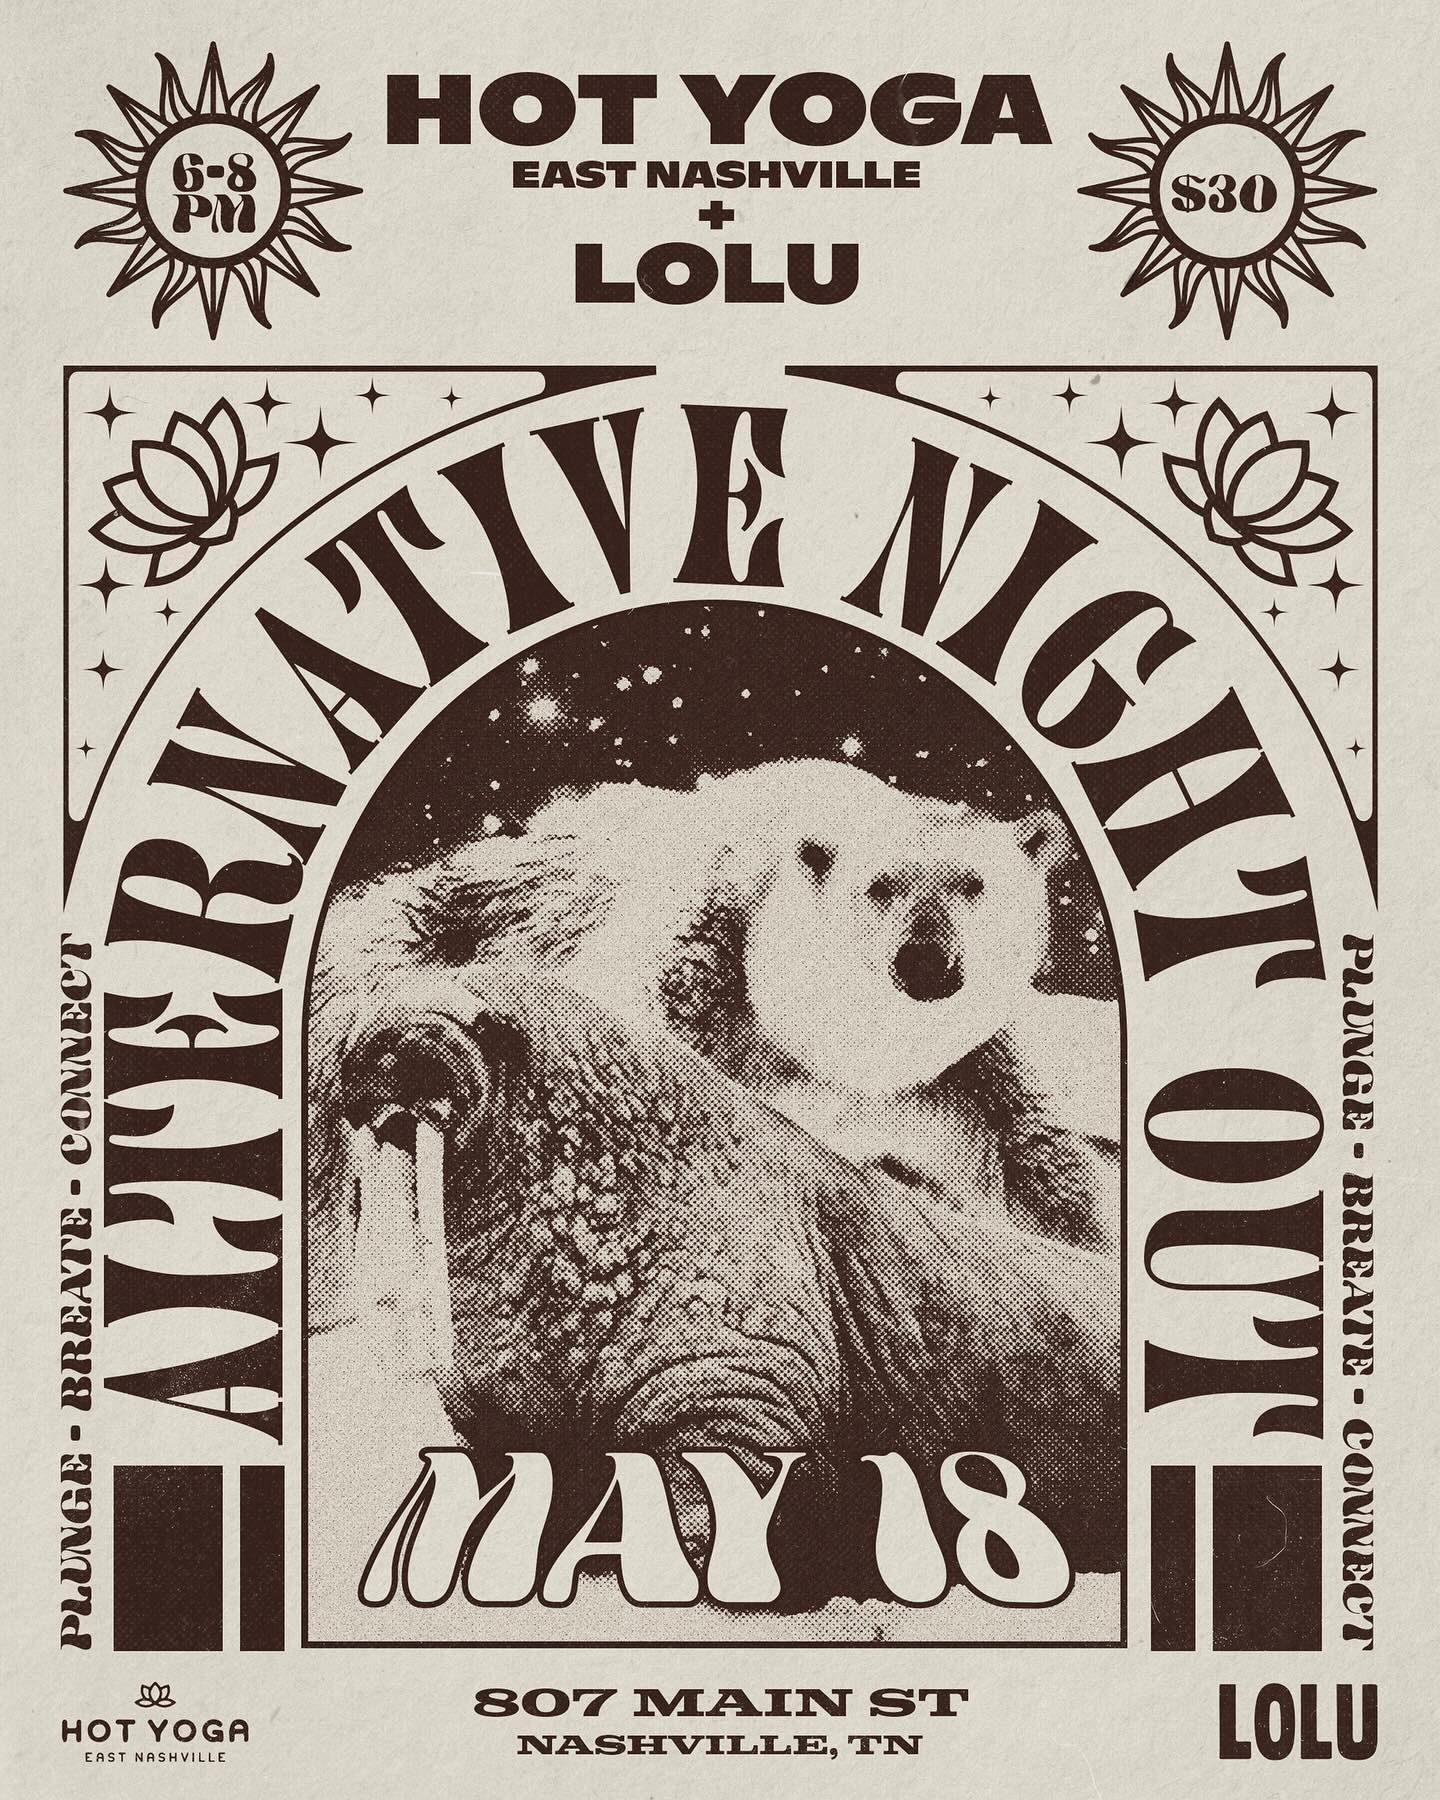 We are so excited to announce our Alternative Night Out with @hotyogaeastnashville Saturday, May 18th!!! 
A.N.O. is a place to evolve your community. It is a new kind of nightlife based on mindful and healing connection. We will incorporate invigorat